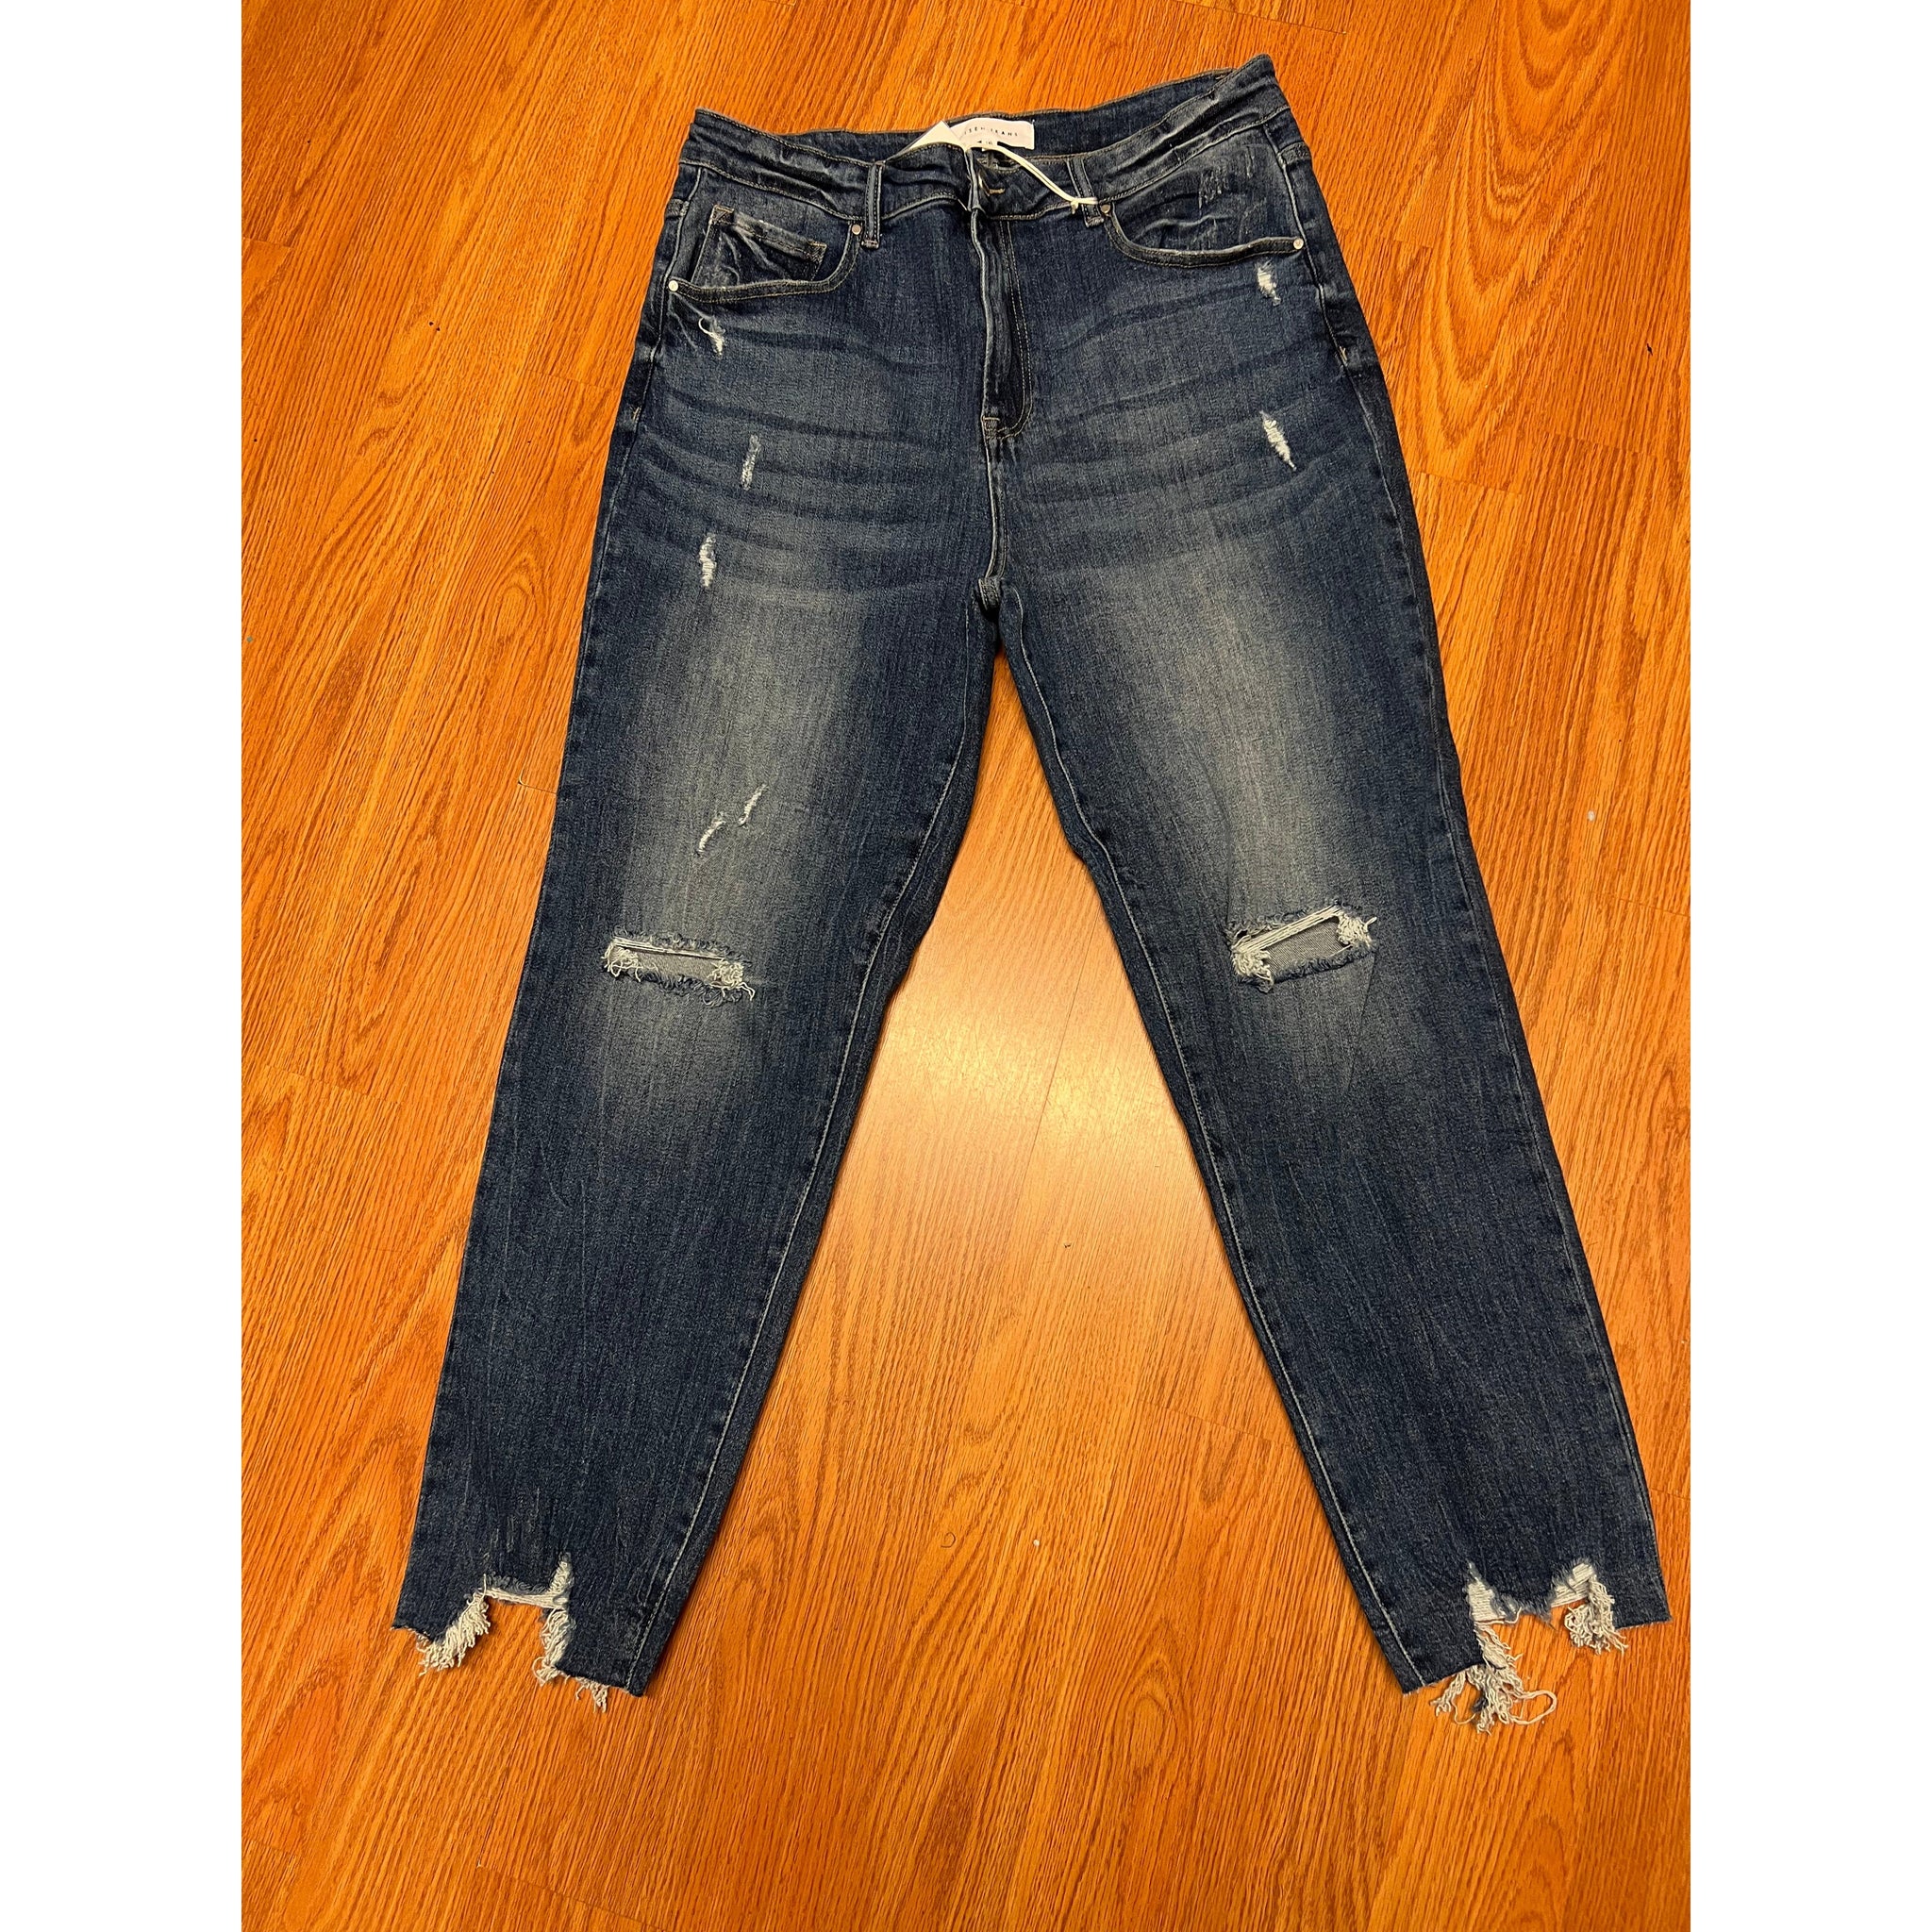 DARK WASH DISTRESSED JEANS-Body and Sol